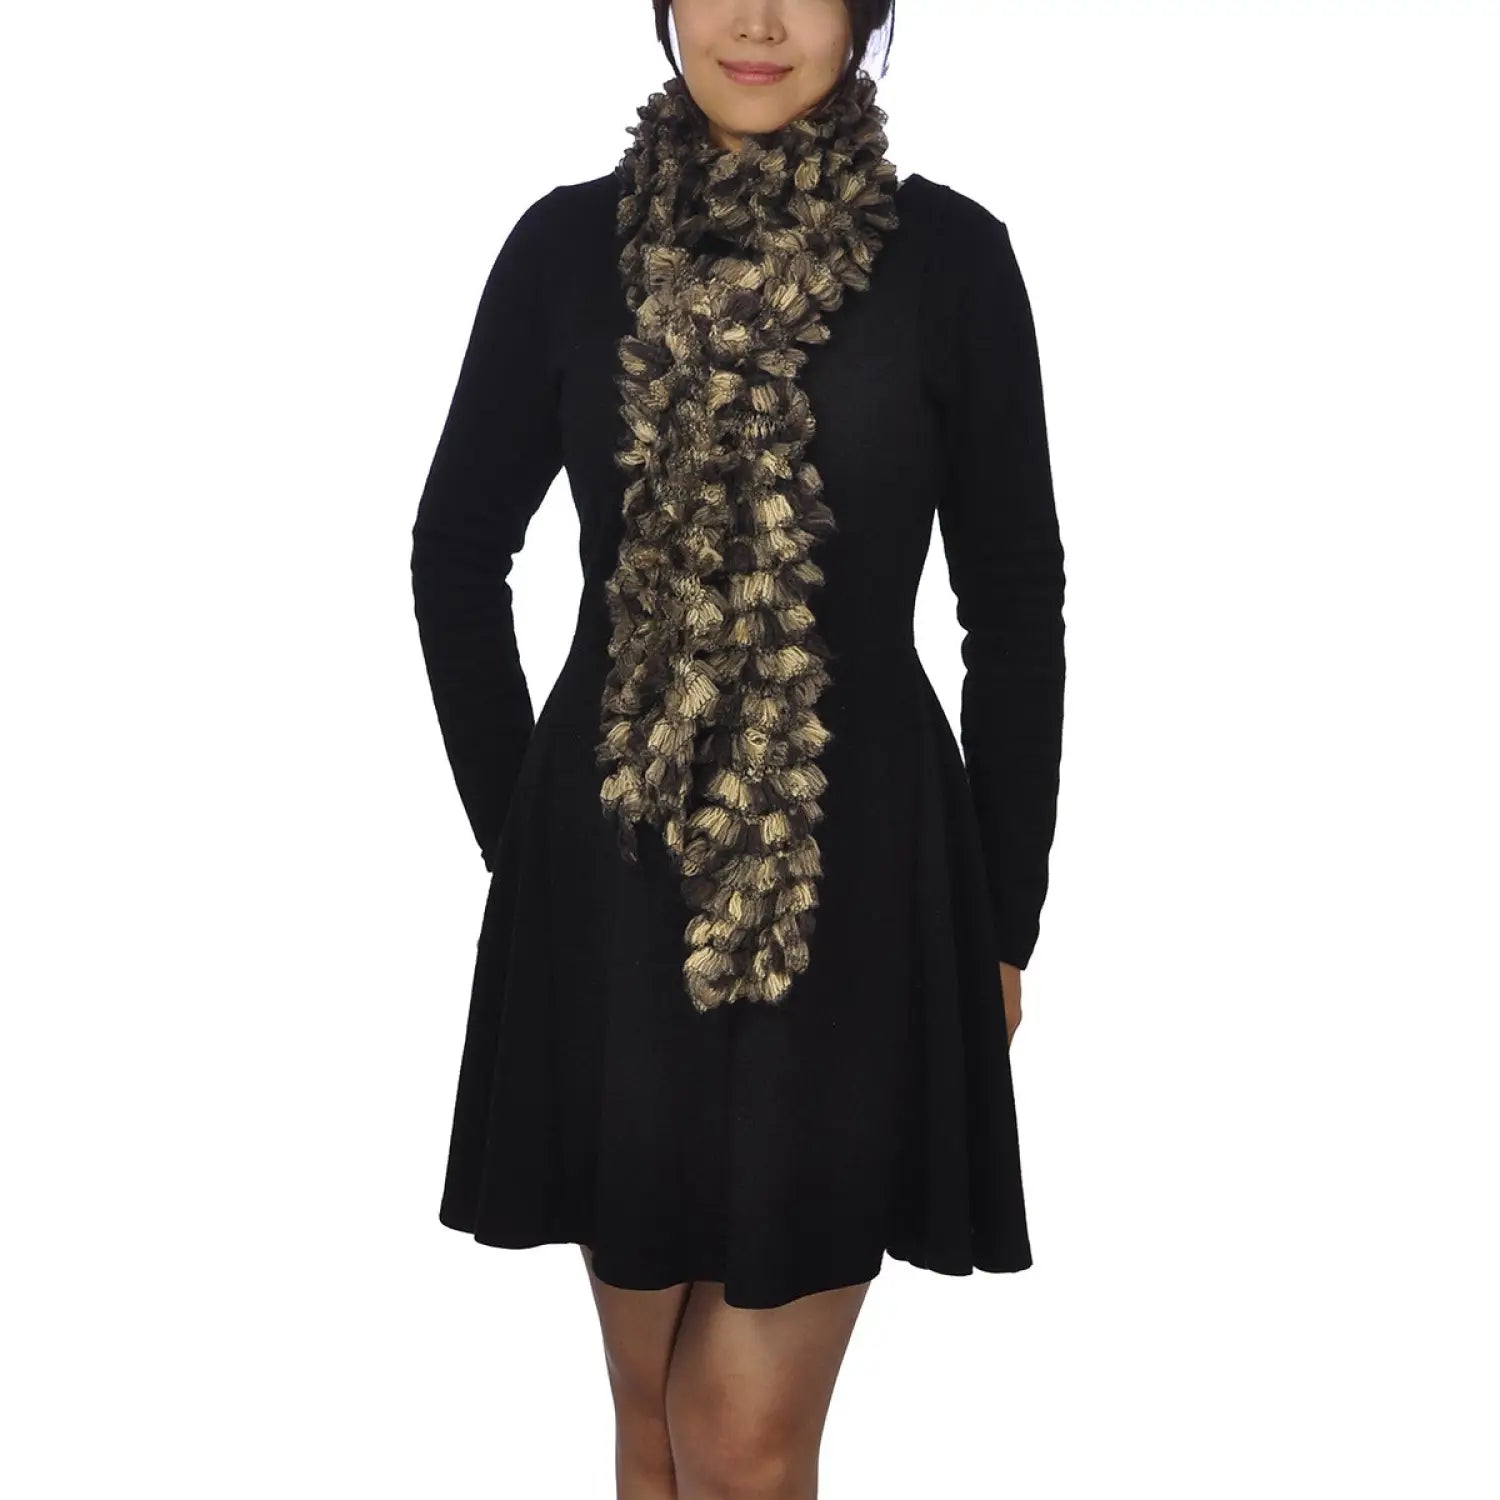 Woman in black dress and gold scarf with Multicoloured Textured Boa Print Scarf.